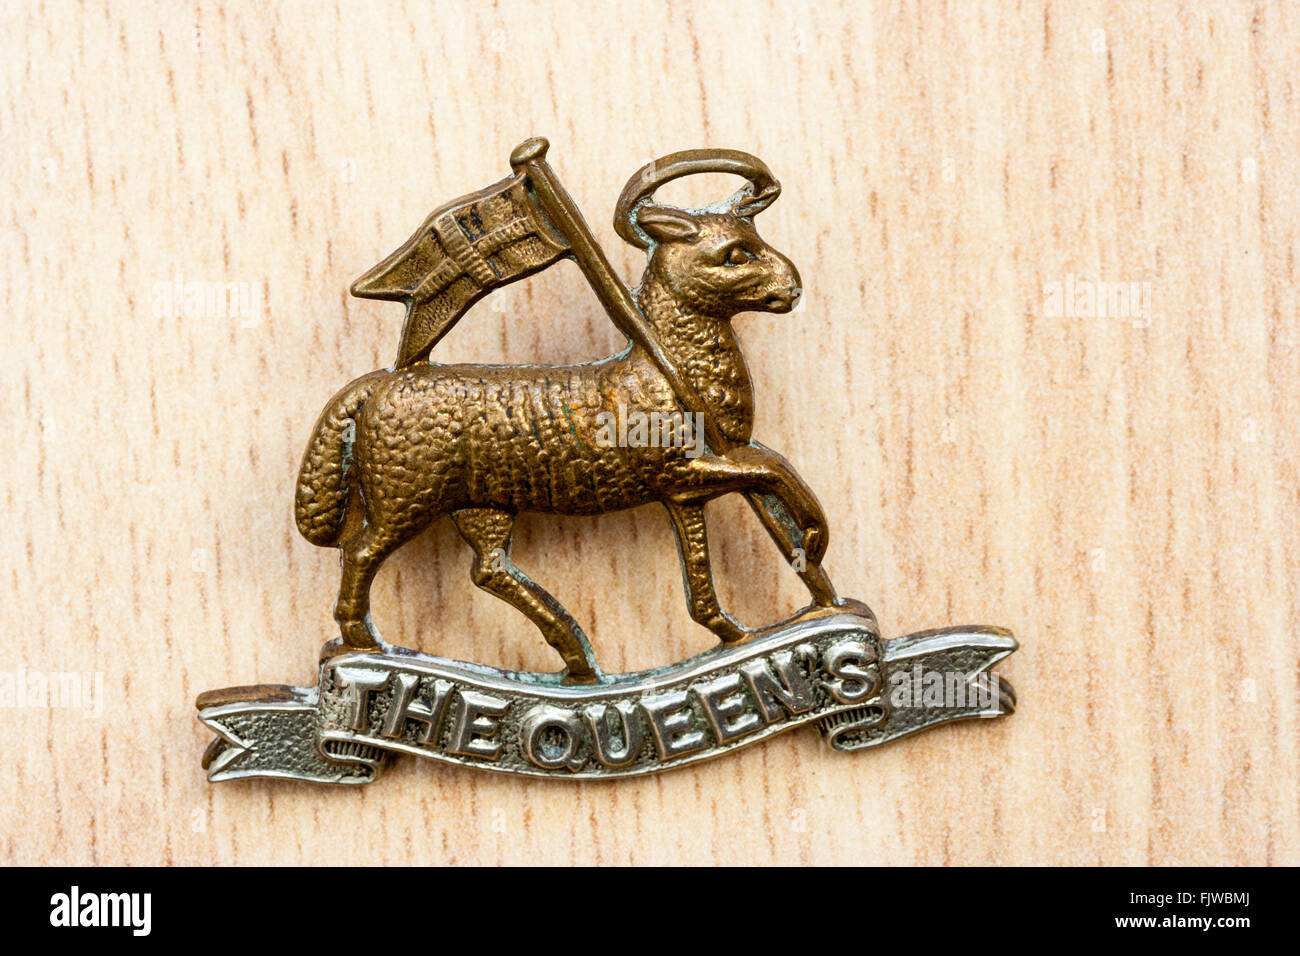 First world war, the great war. British army cap badge. The Queen's Regiment. Ram holding standard with 'The Queens' on metal scroll. Stock Photo